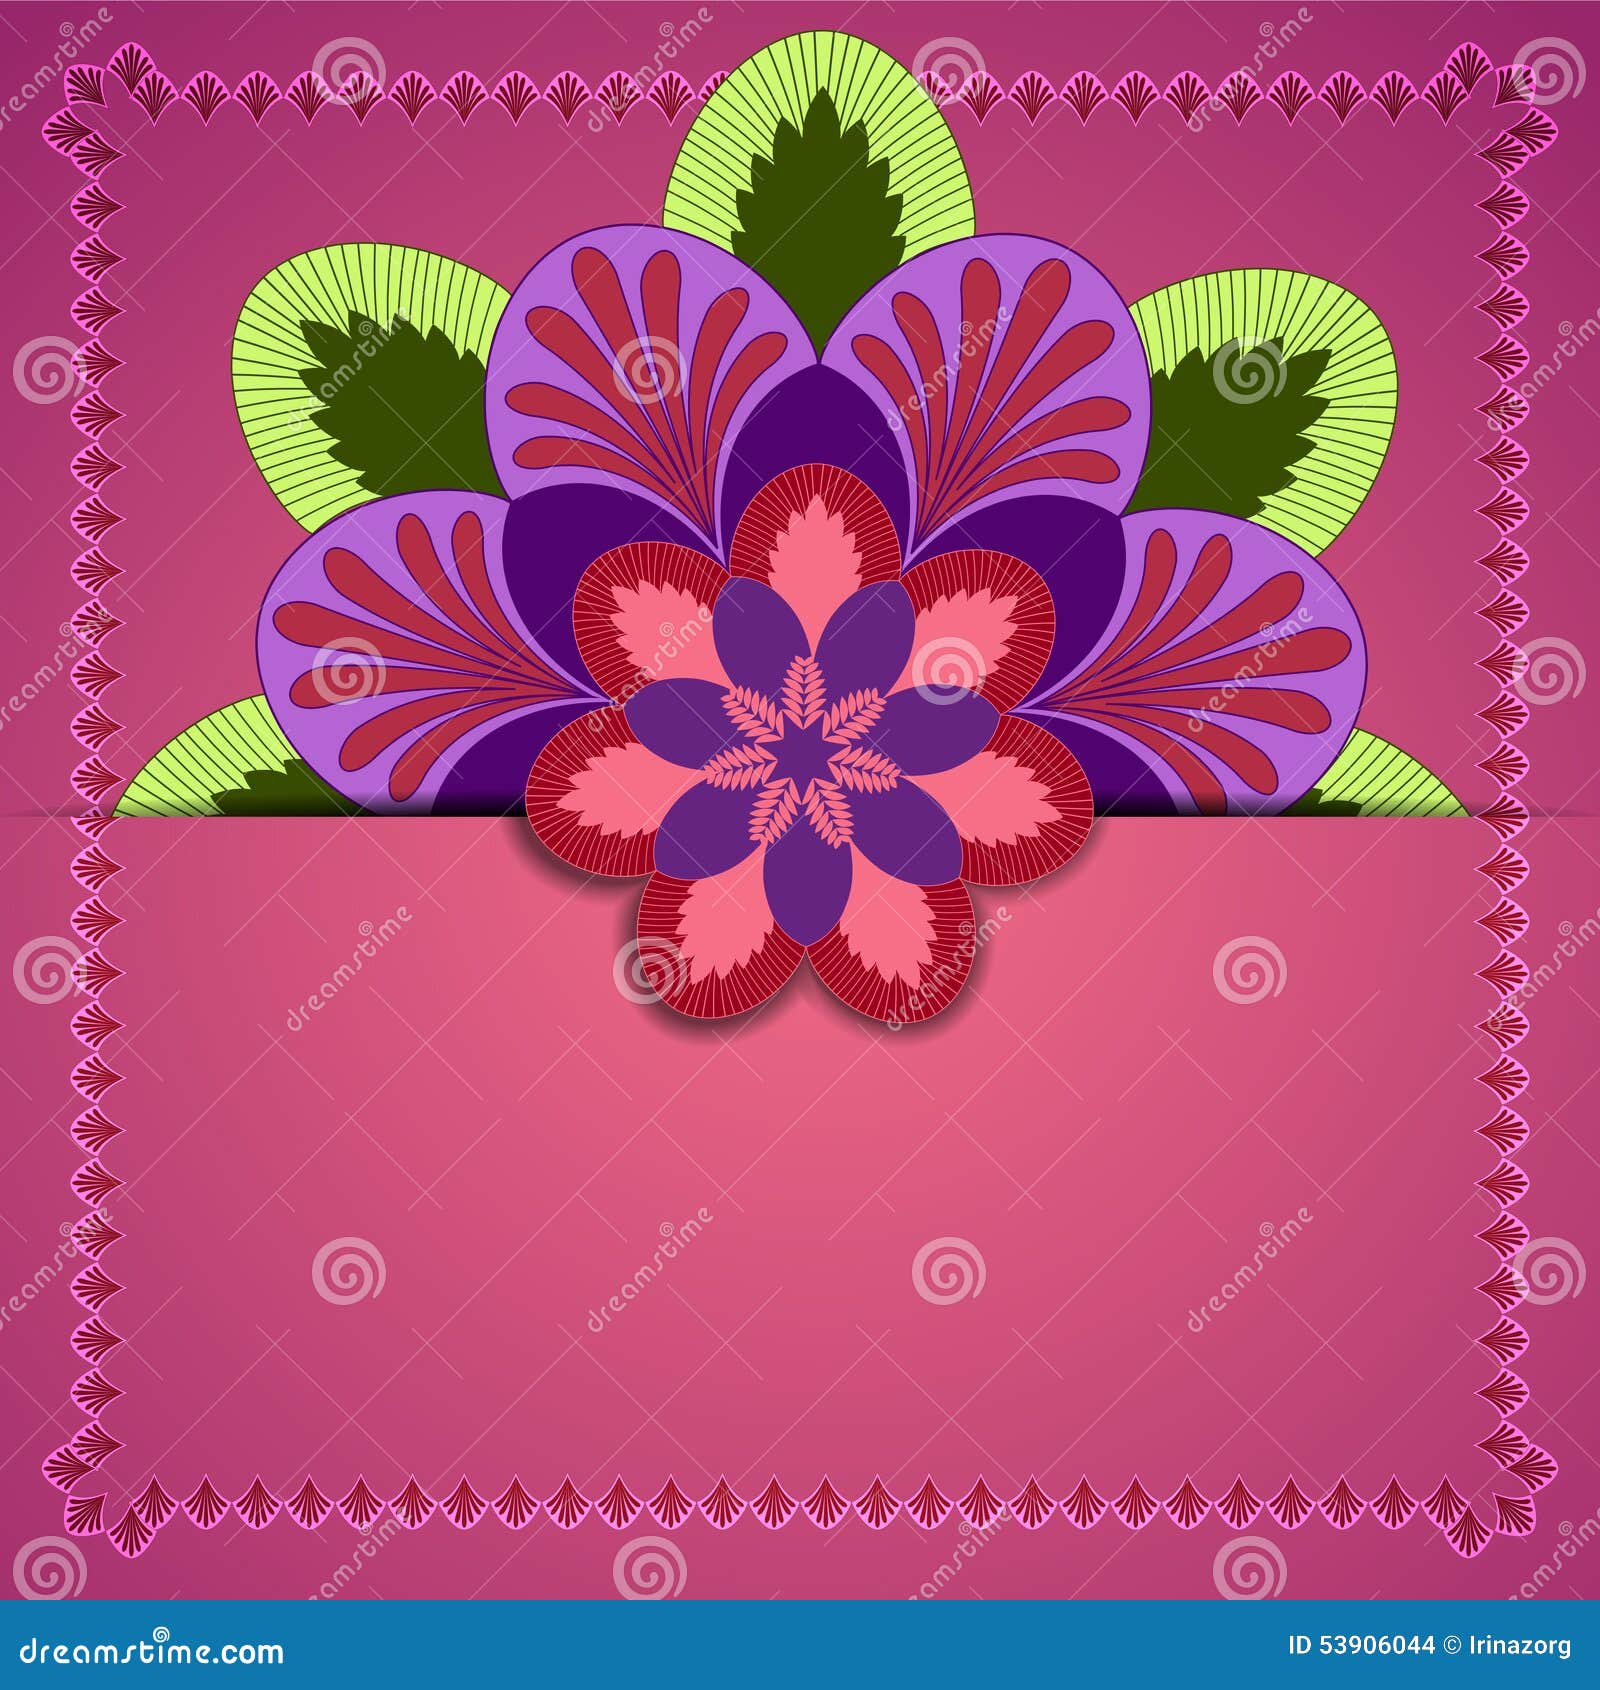 Spa Stones And Flowers And Leafs Stock Vector - Illustration of grass